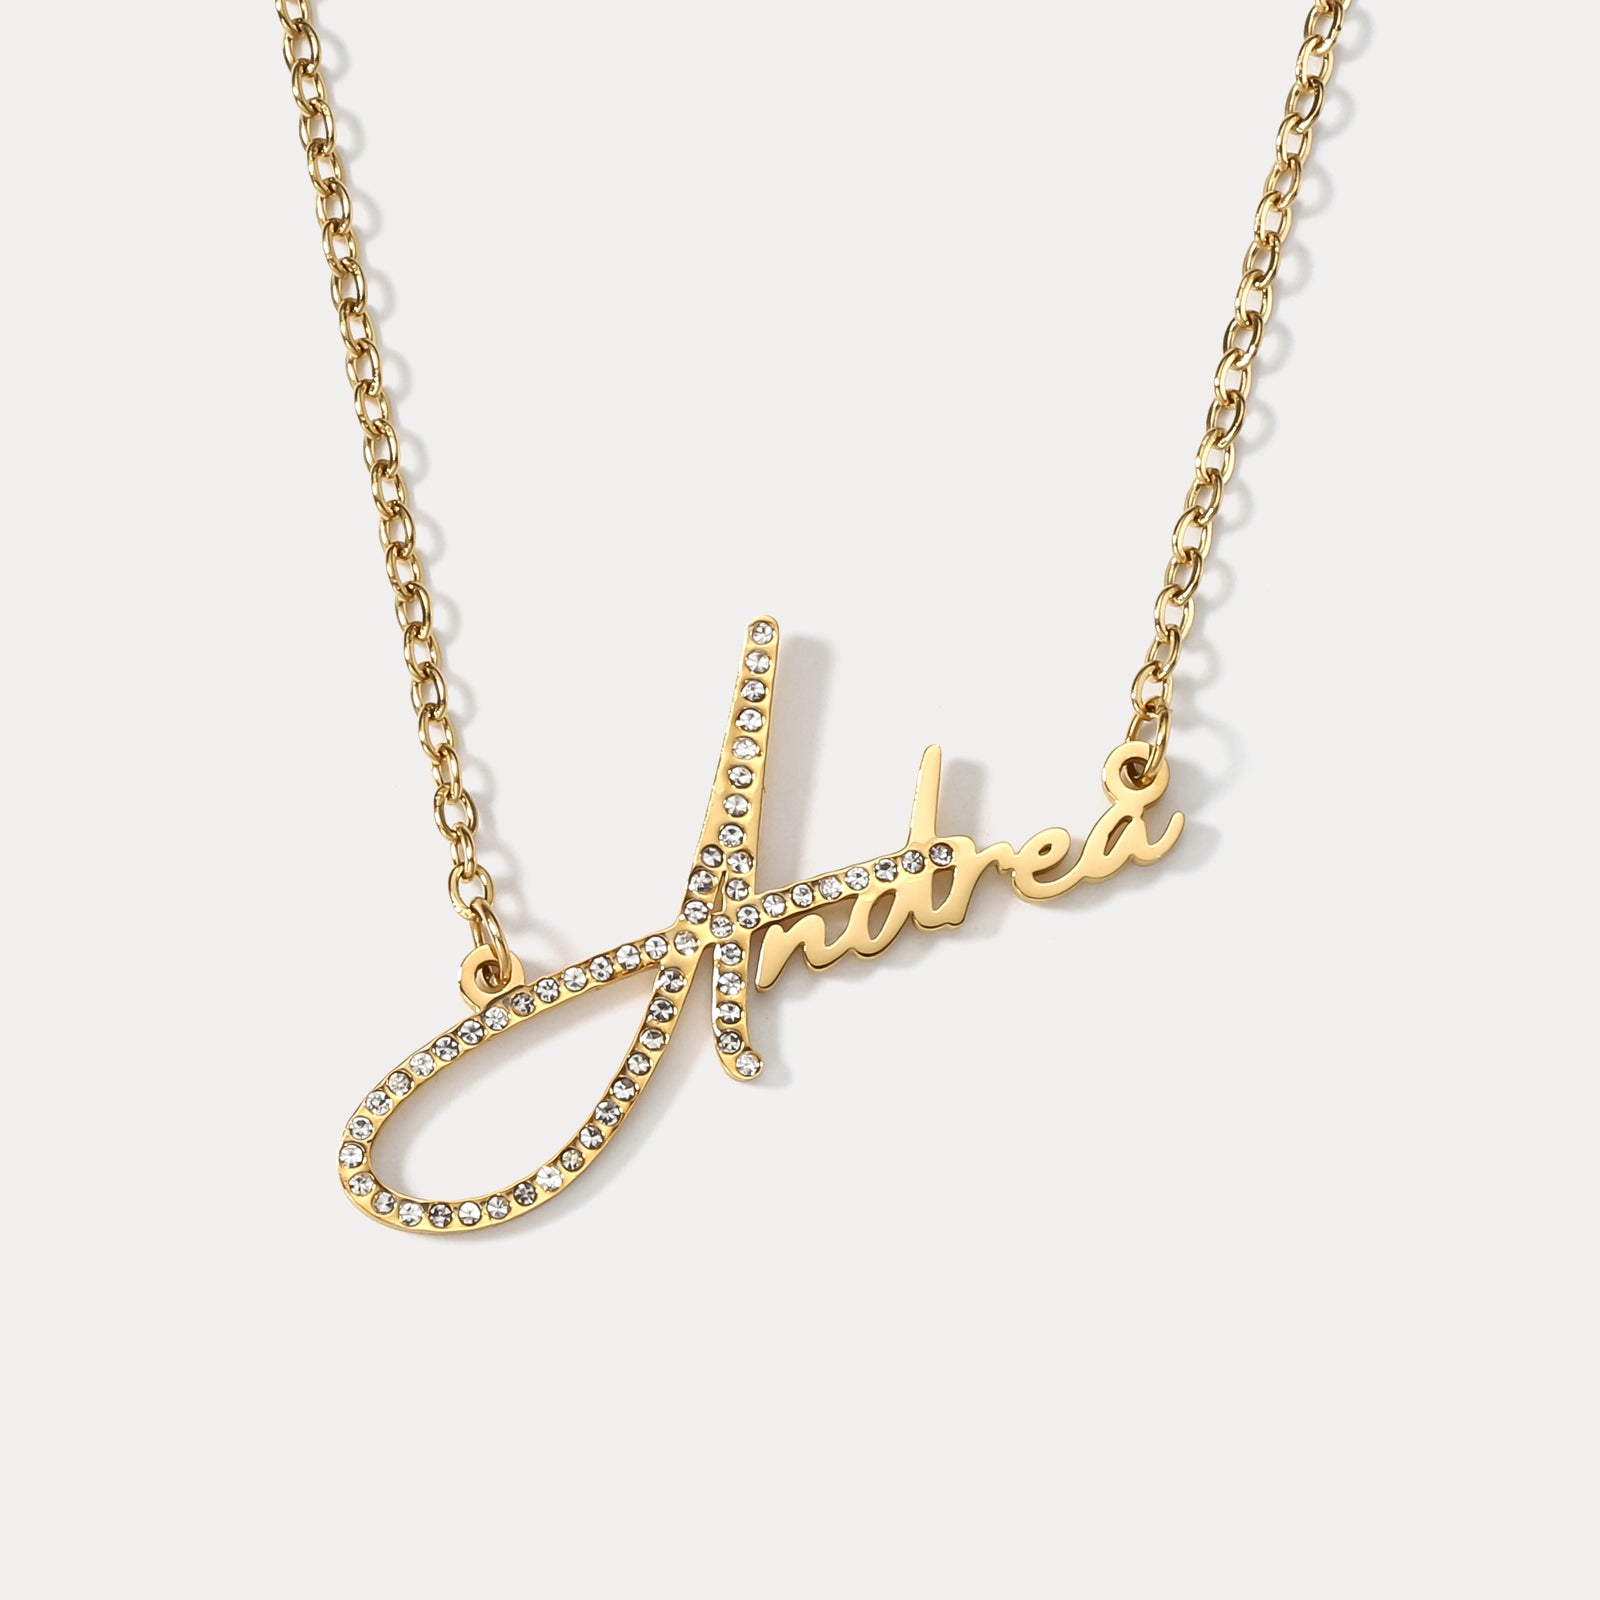 Selenichast Personalized Name Necklace